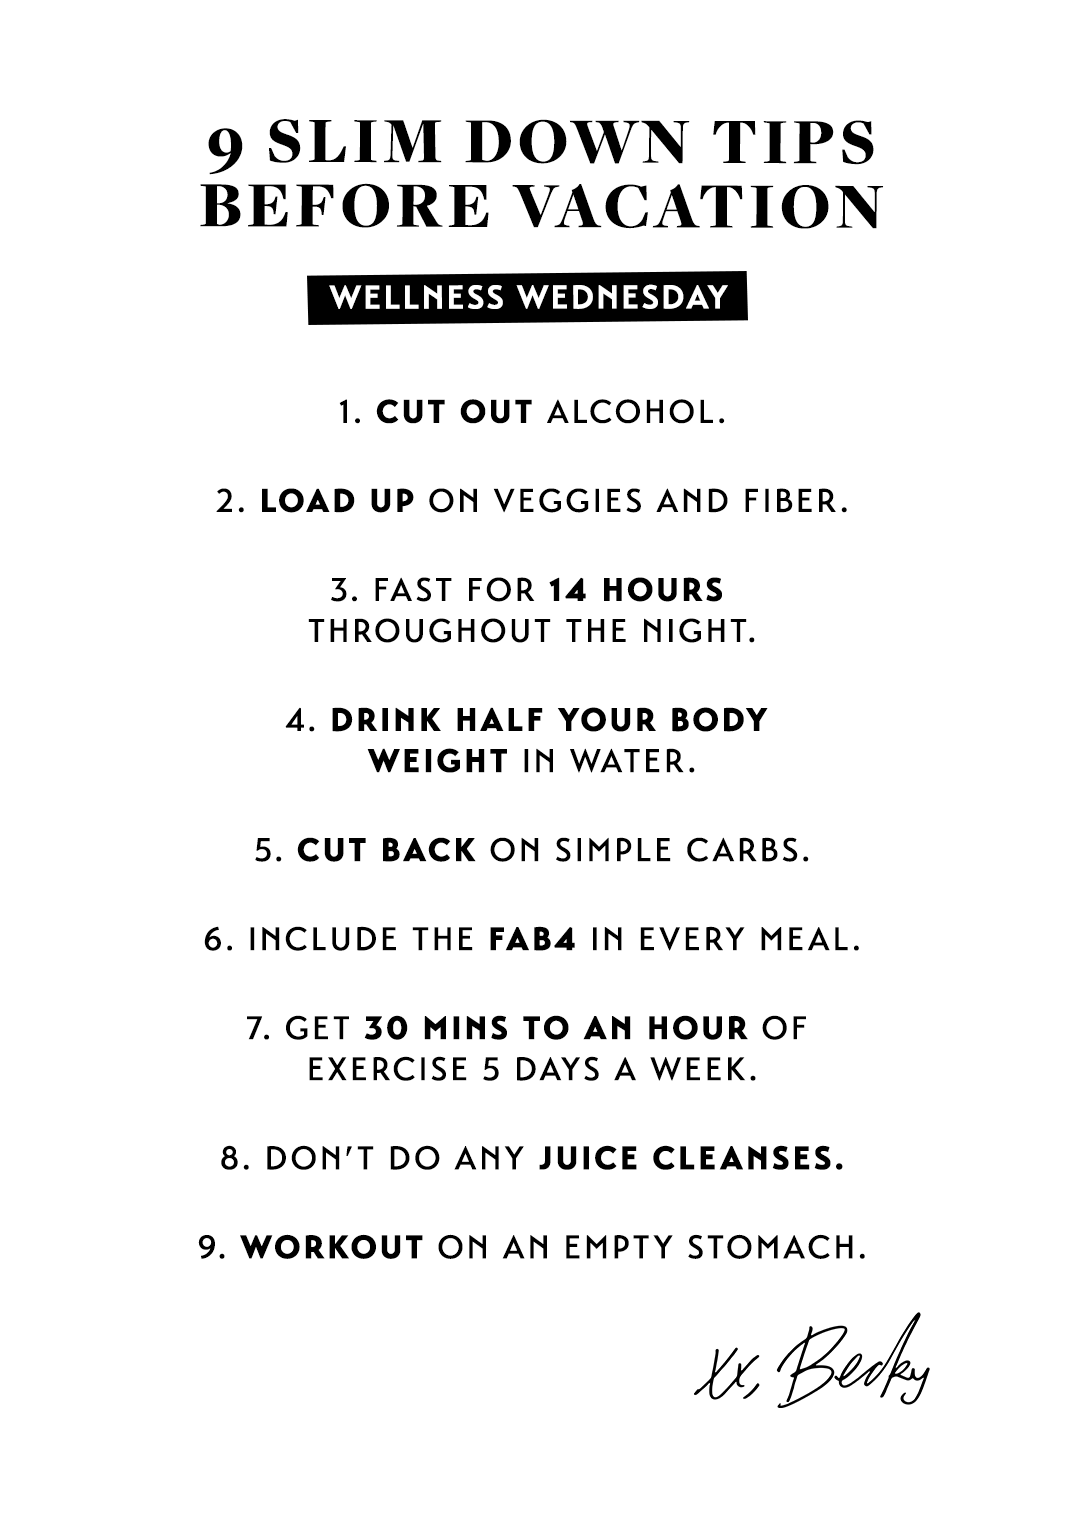 Wellness Wednesday- 9 Slim Down Tips before Vacation